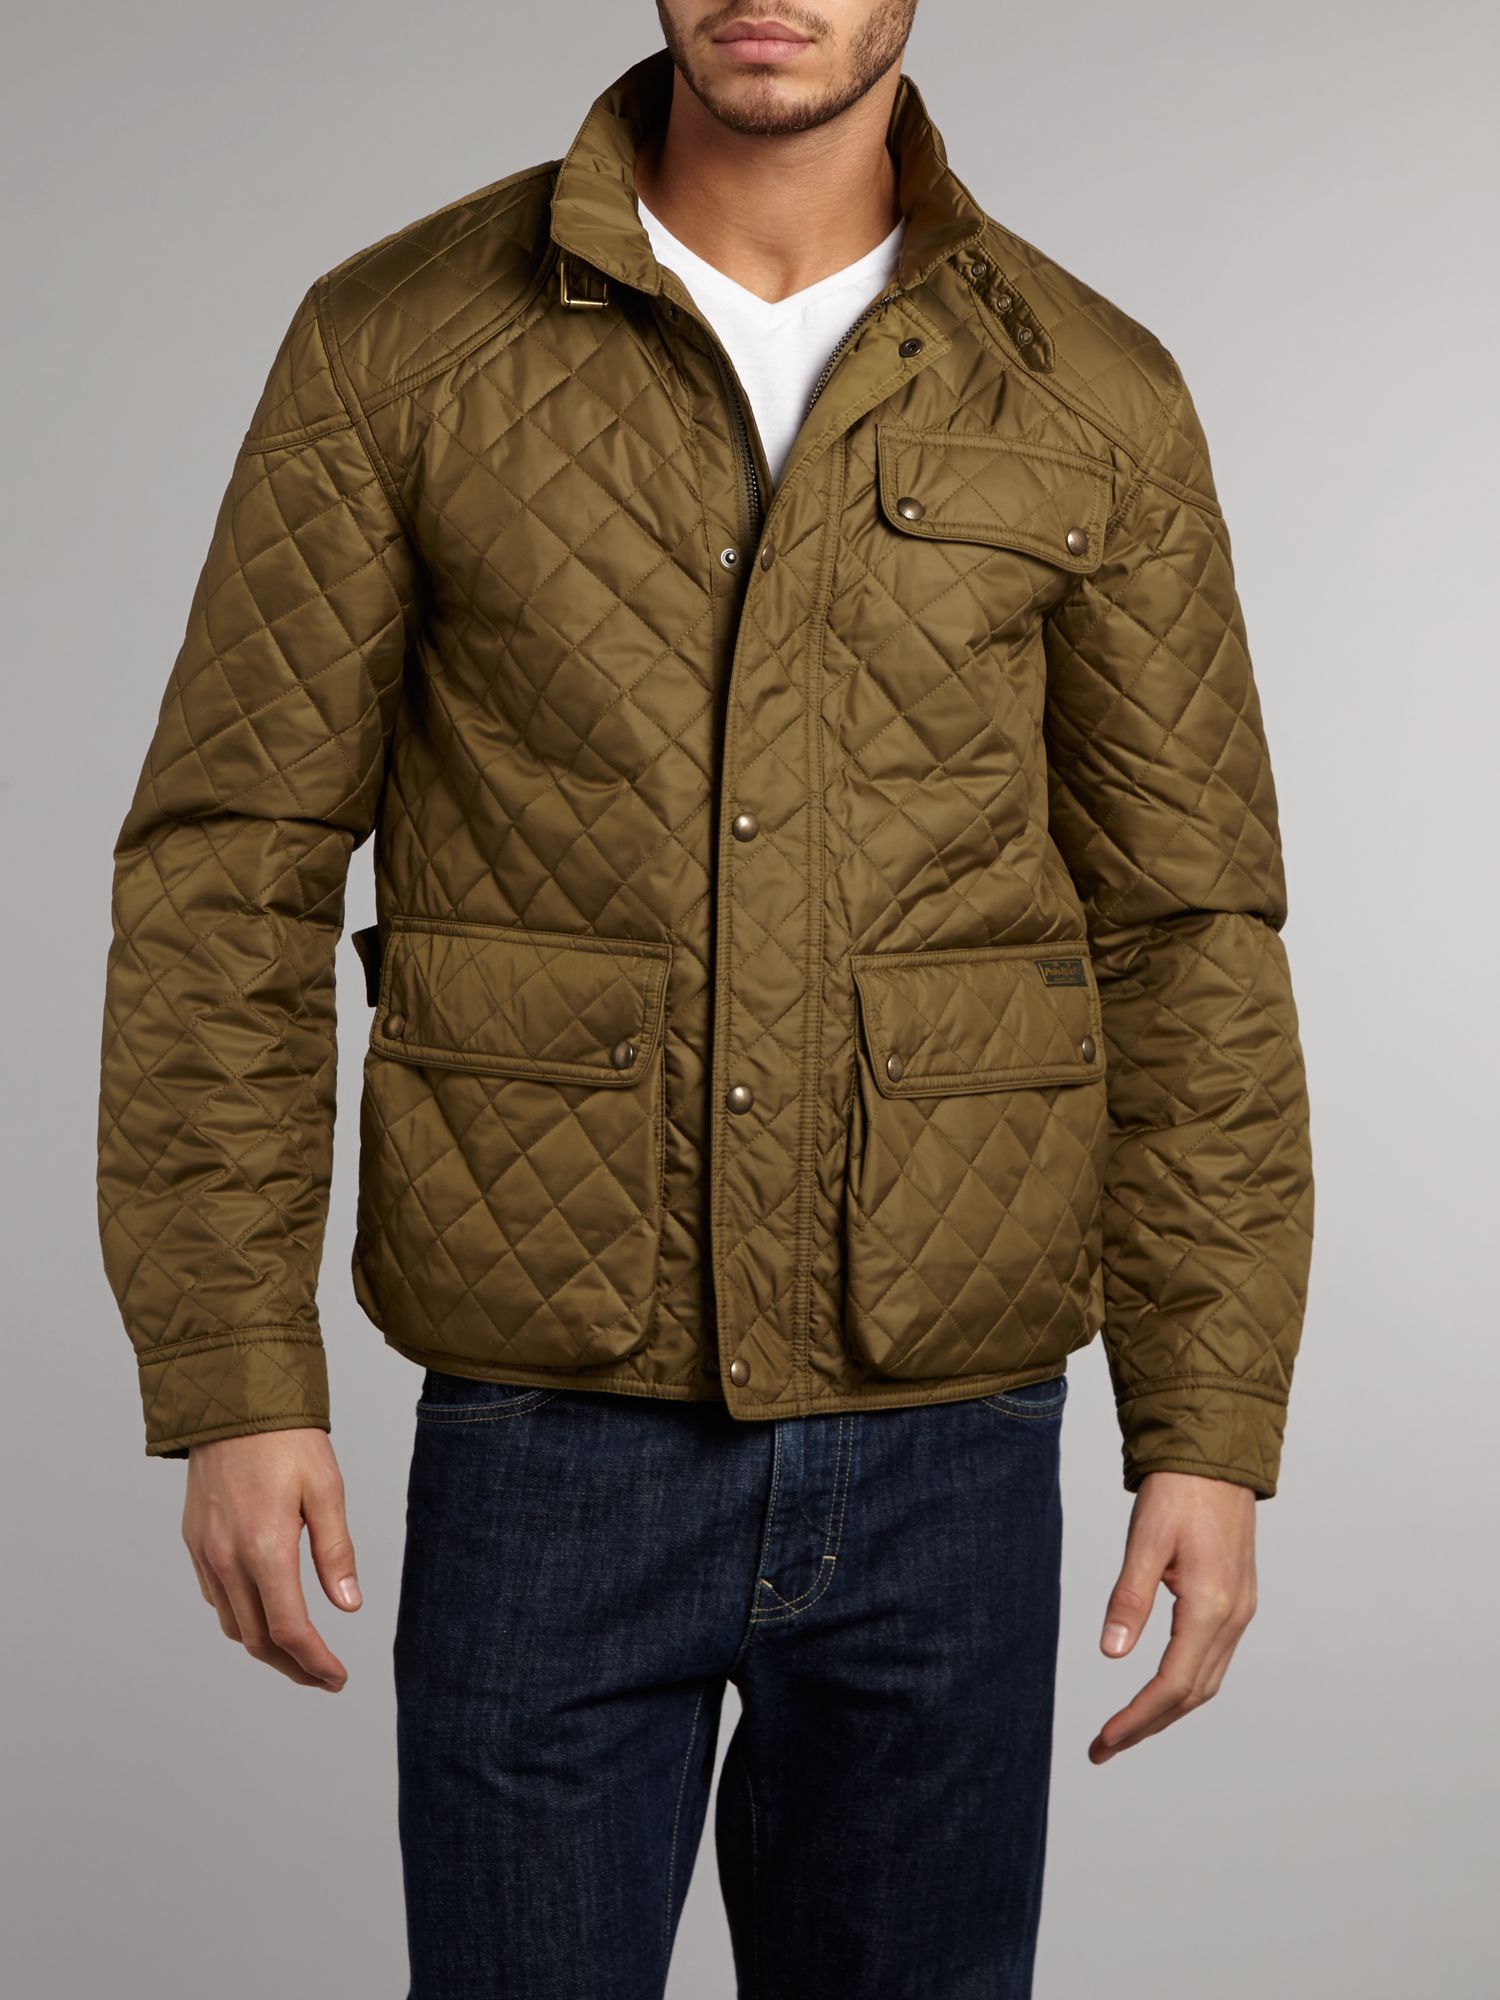 Polo ralph lauren Cadwell Quilted Bomber Jacket in Natural for Men | Lyst